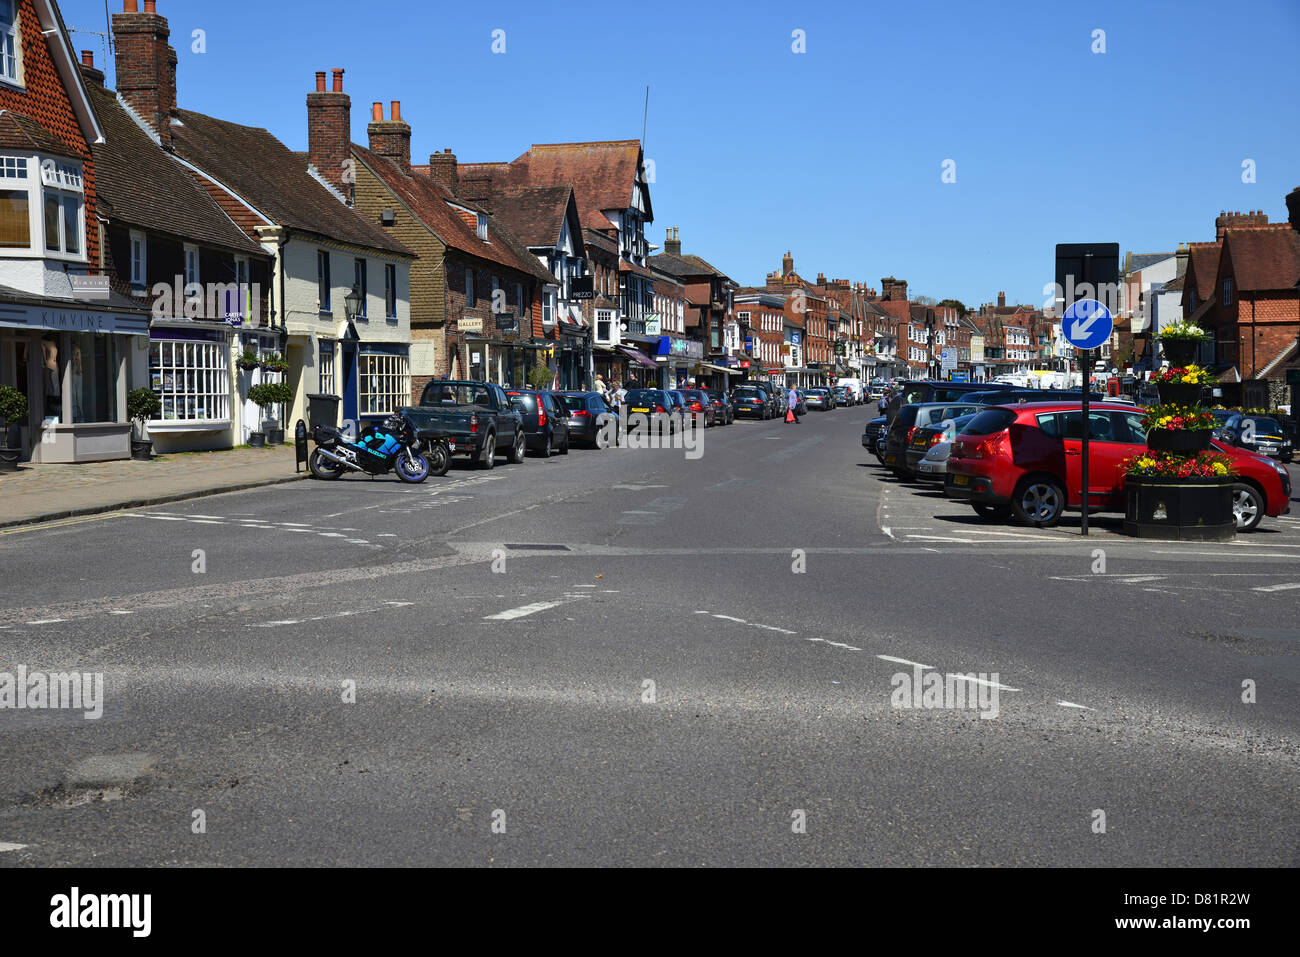 A view of the High Street in the Wiltshire town of Marlborough Stock Photo